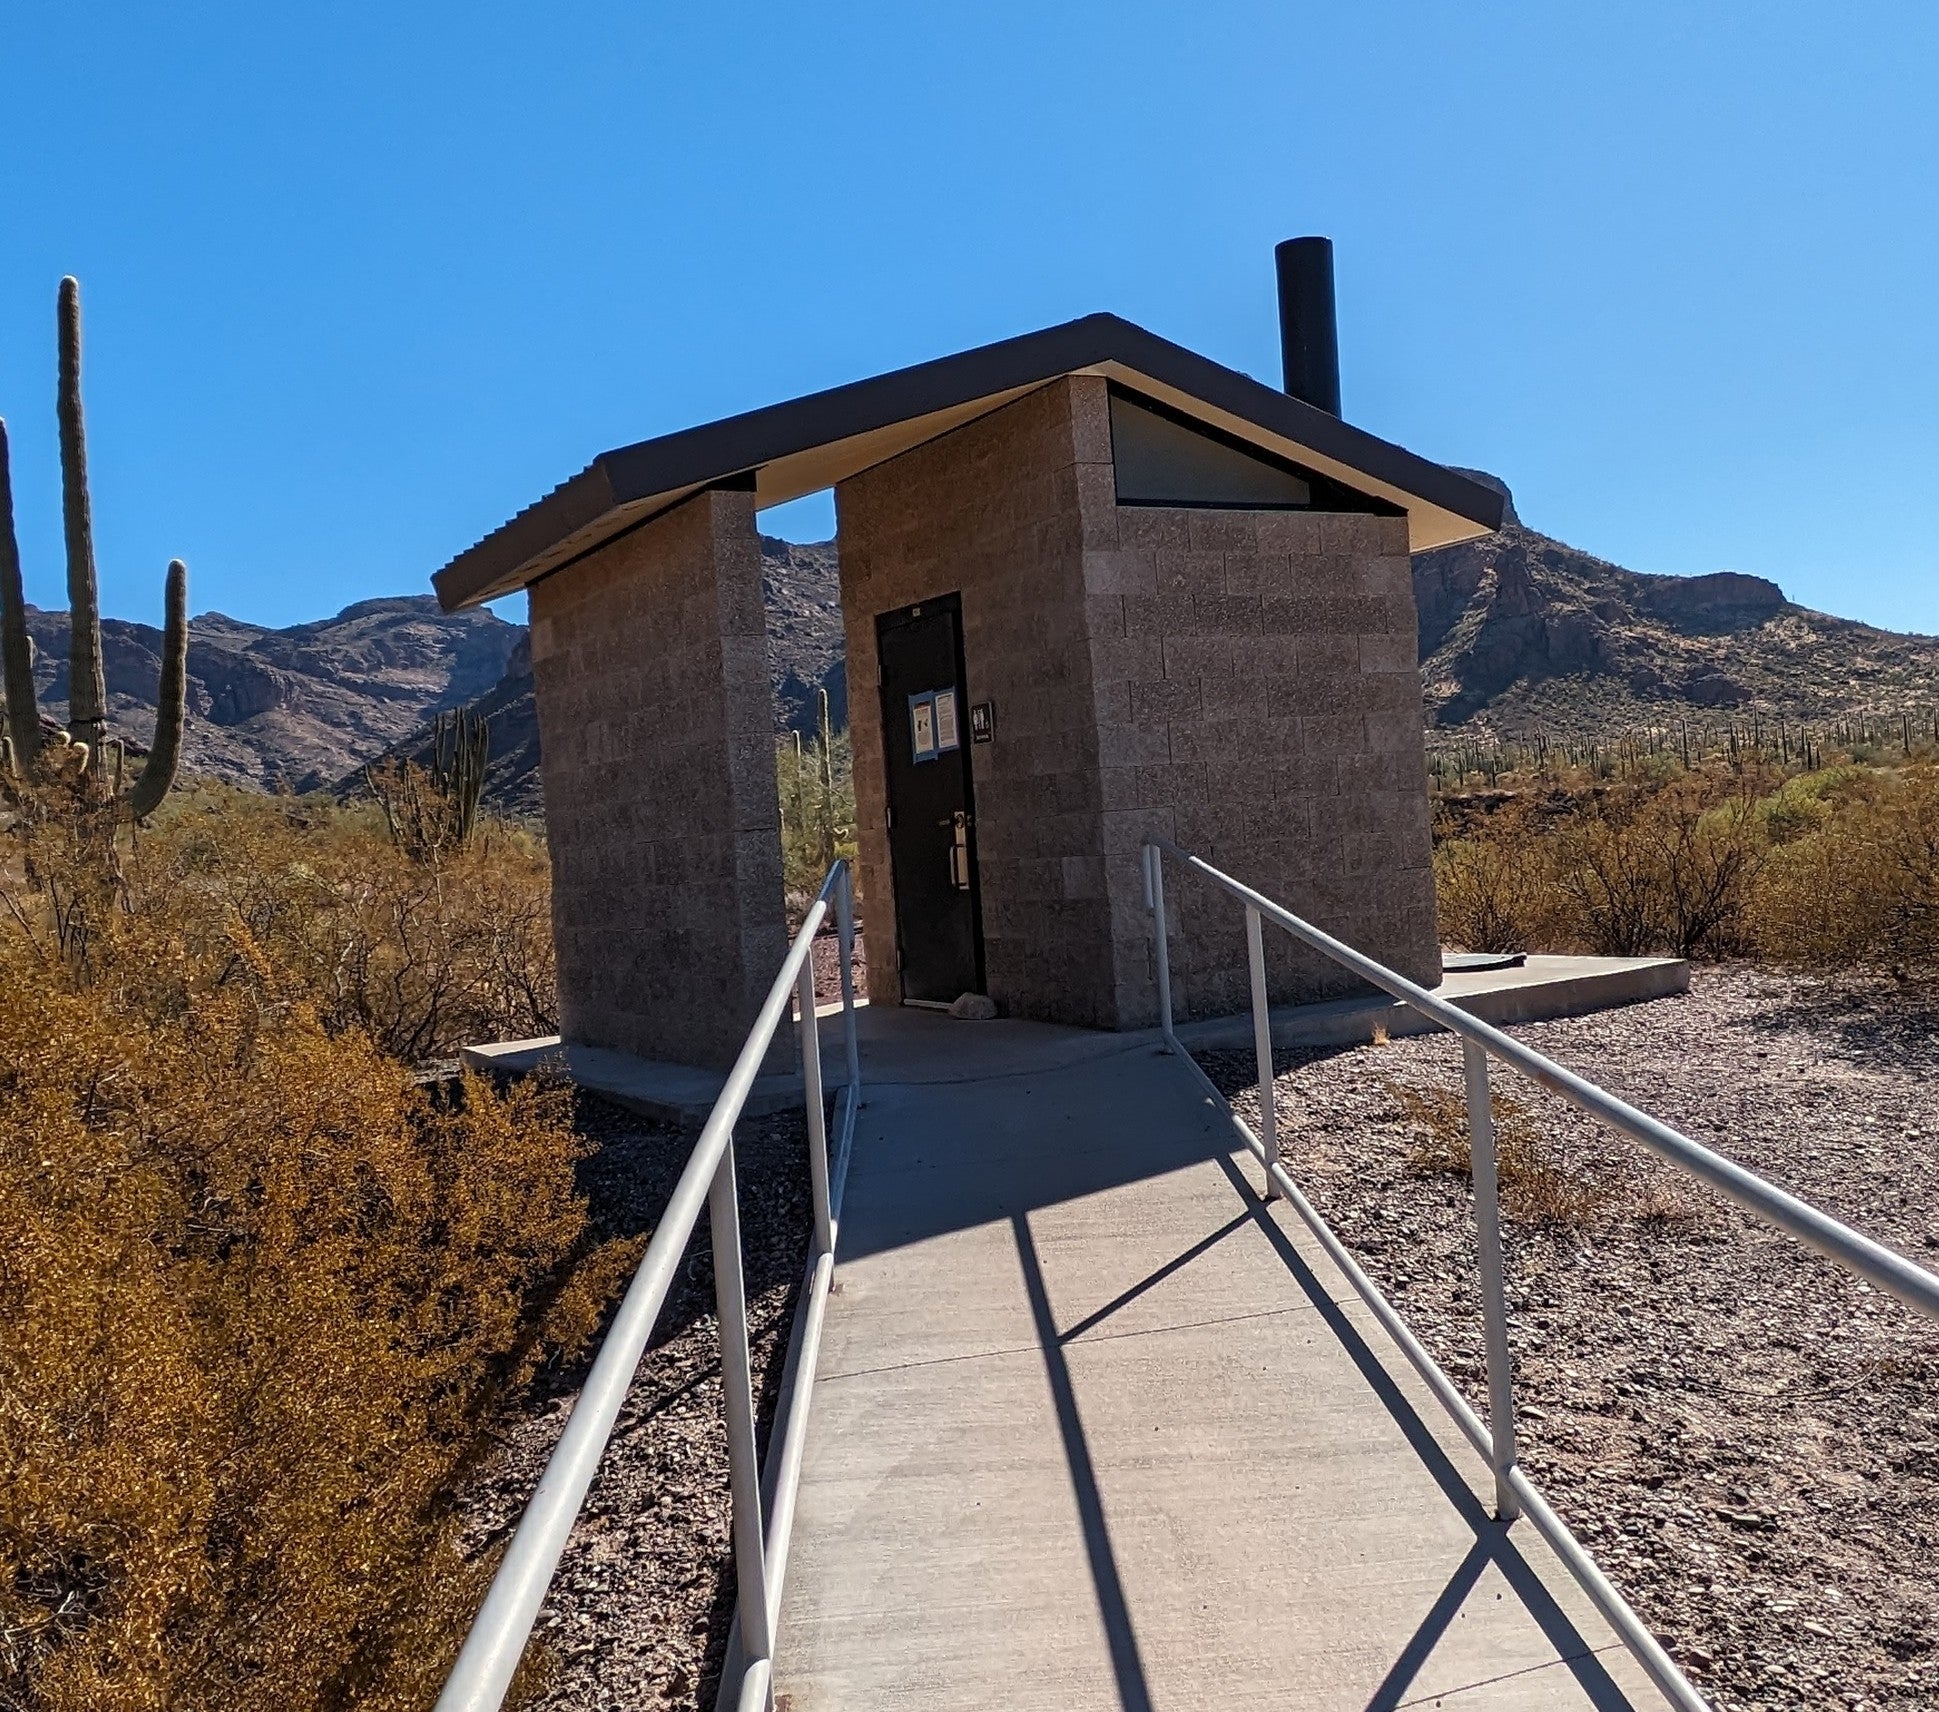 Camper submitted image from Alamo Canyon Primitive Campground — Organ Pipe Cactus National Monument - 4